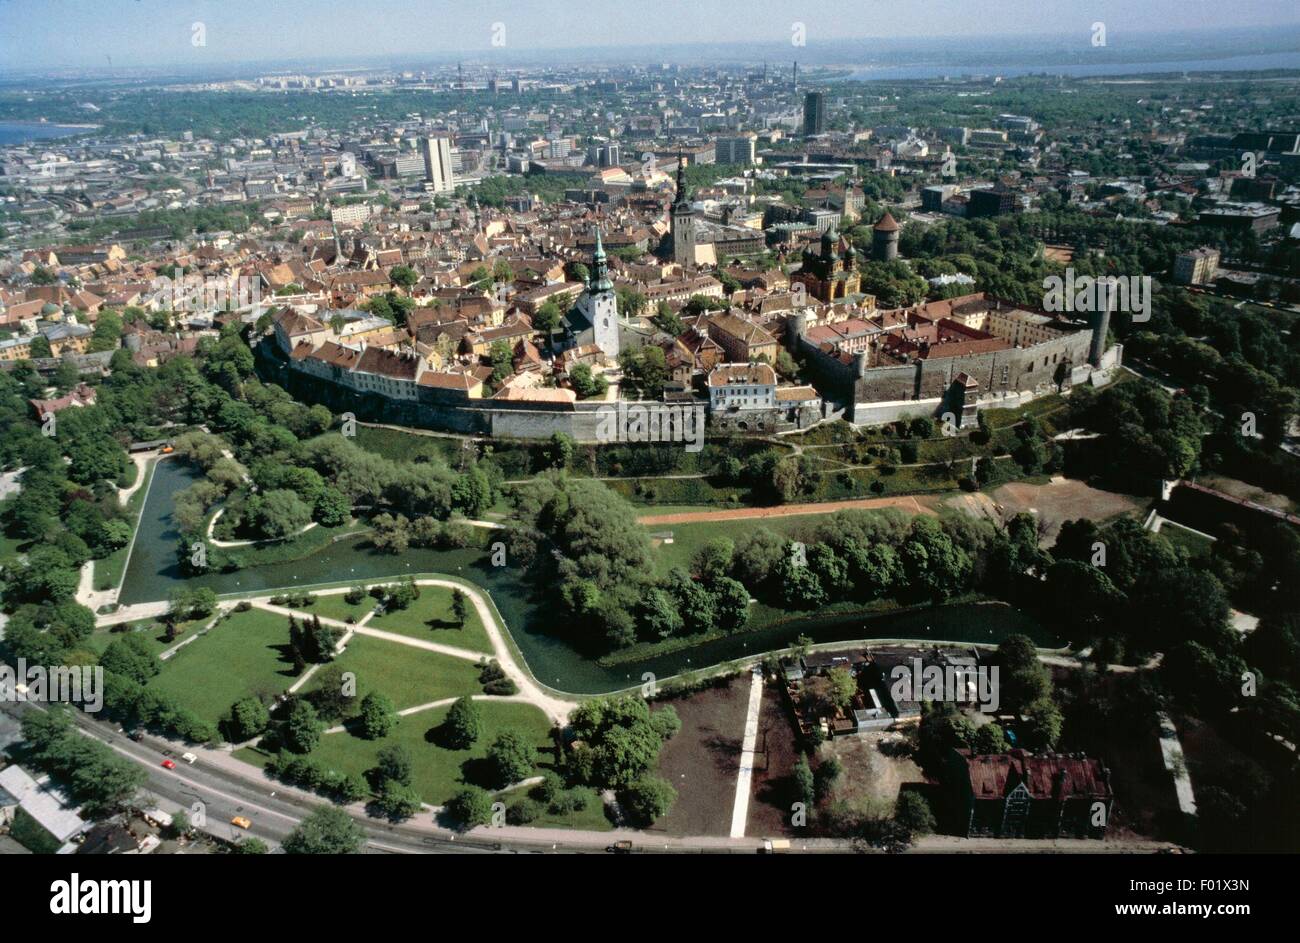 Aerial view of the Old City of Tallinn and its walls, 14th-16th century (UNESCO World Heritage List, 1997) - Estonia. Stock Photo